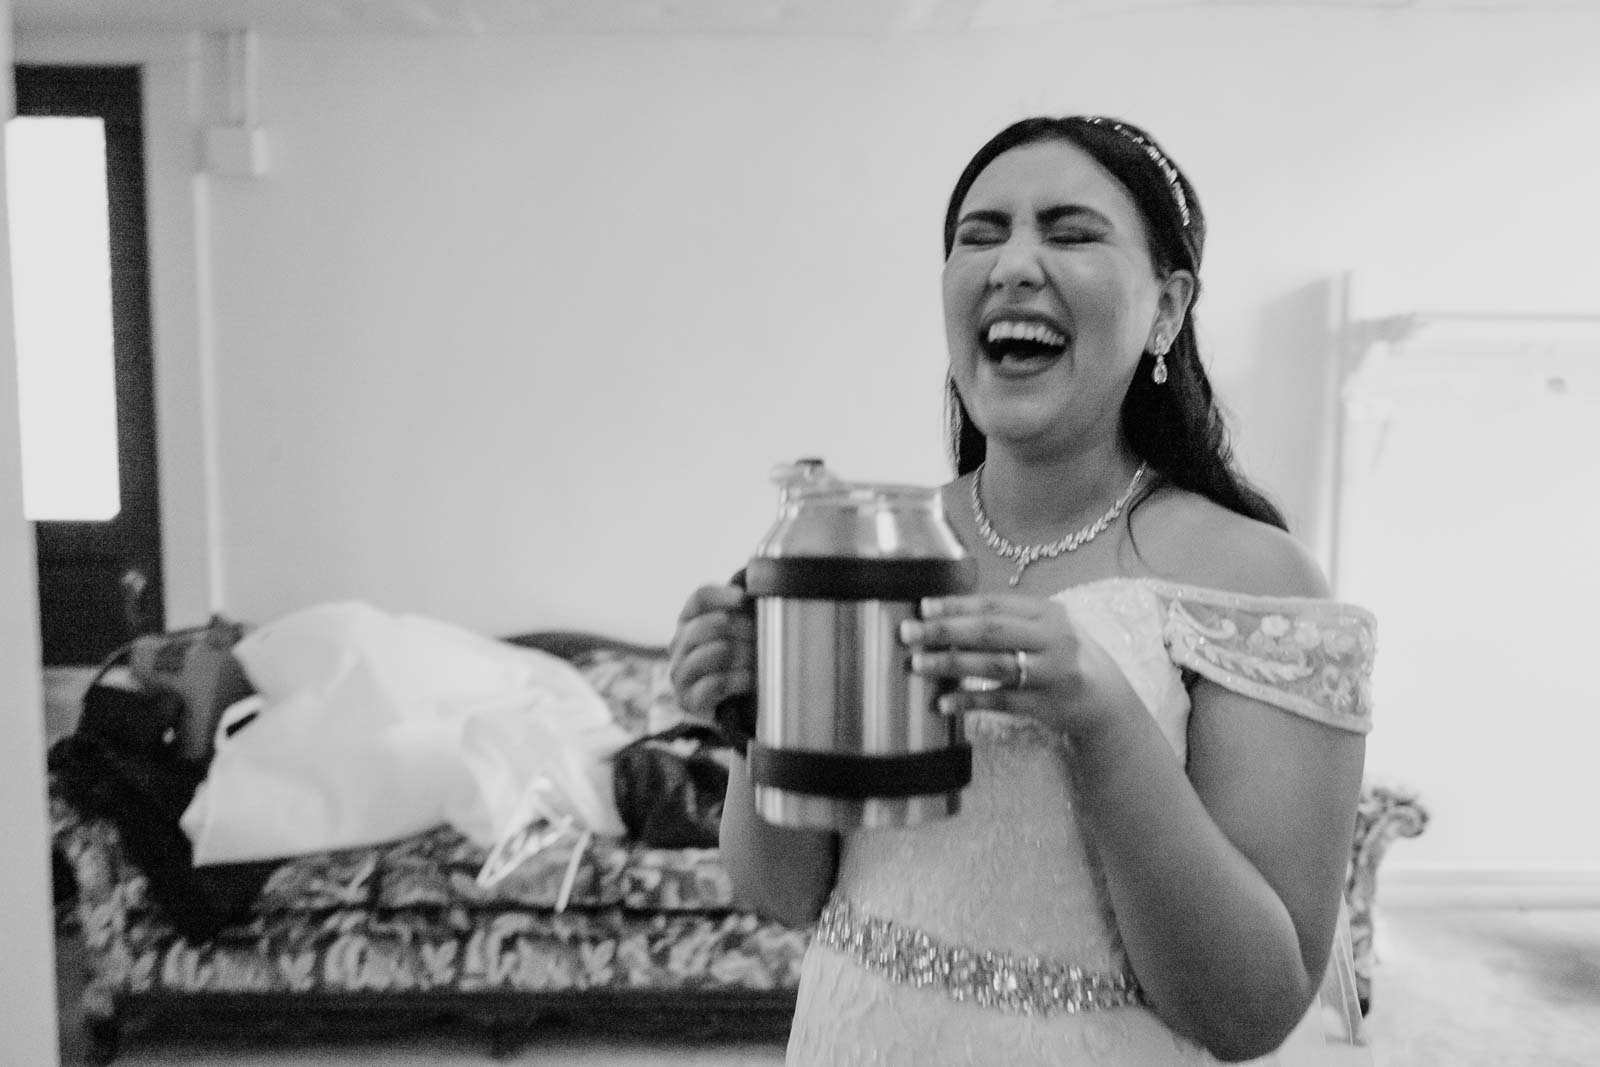 A moment of laughter has bride sips a drink from her drink carrier A best friend hold the wedding veil high so as not to wrinkle it The mother clutches the end of the veil The bride beams with a wide smile at mirror A dragged shutter images black and white leica has friends embrace at wedding Arsy the bride checks her earrings look perfect in mirror Jewellery is added to brides wrist by her mother The bride slips on her wedding shoes at With a hekping hand from her mother the bride gazes out of window The groom arrives with palm tree in background photographed through window A beautiful dress hangs from the ceiling at Details of the veil in black and white Sacred Heart Chapel-Leica photographer-Philip Thomas Photography